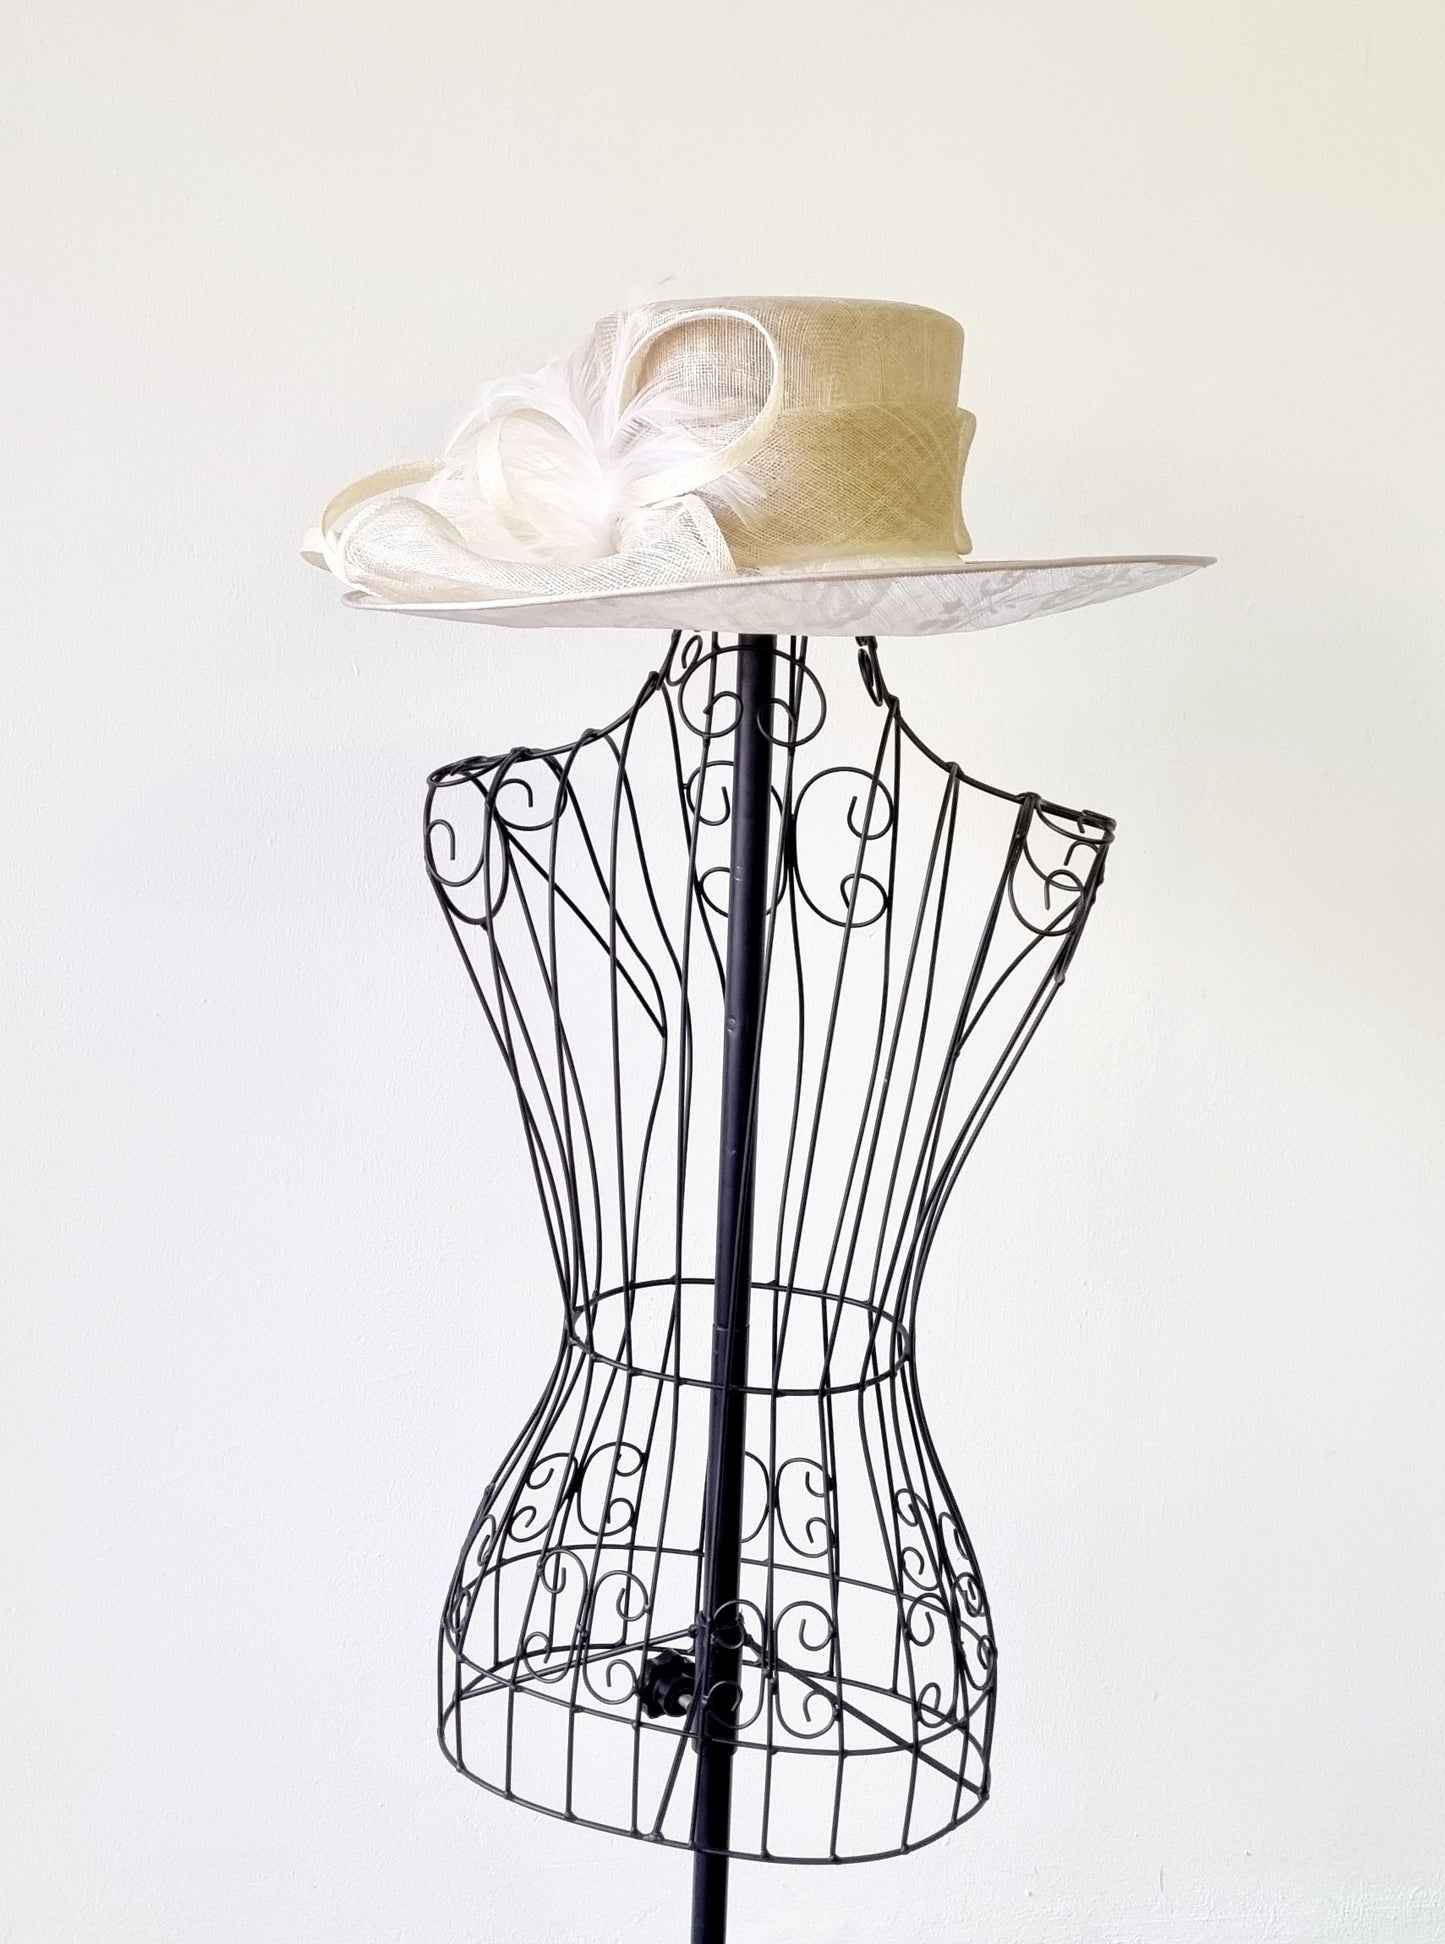 John Lewis - Ivory Hat with Detailed Bow